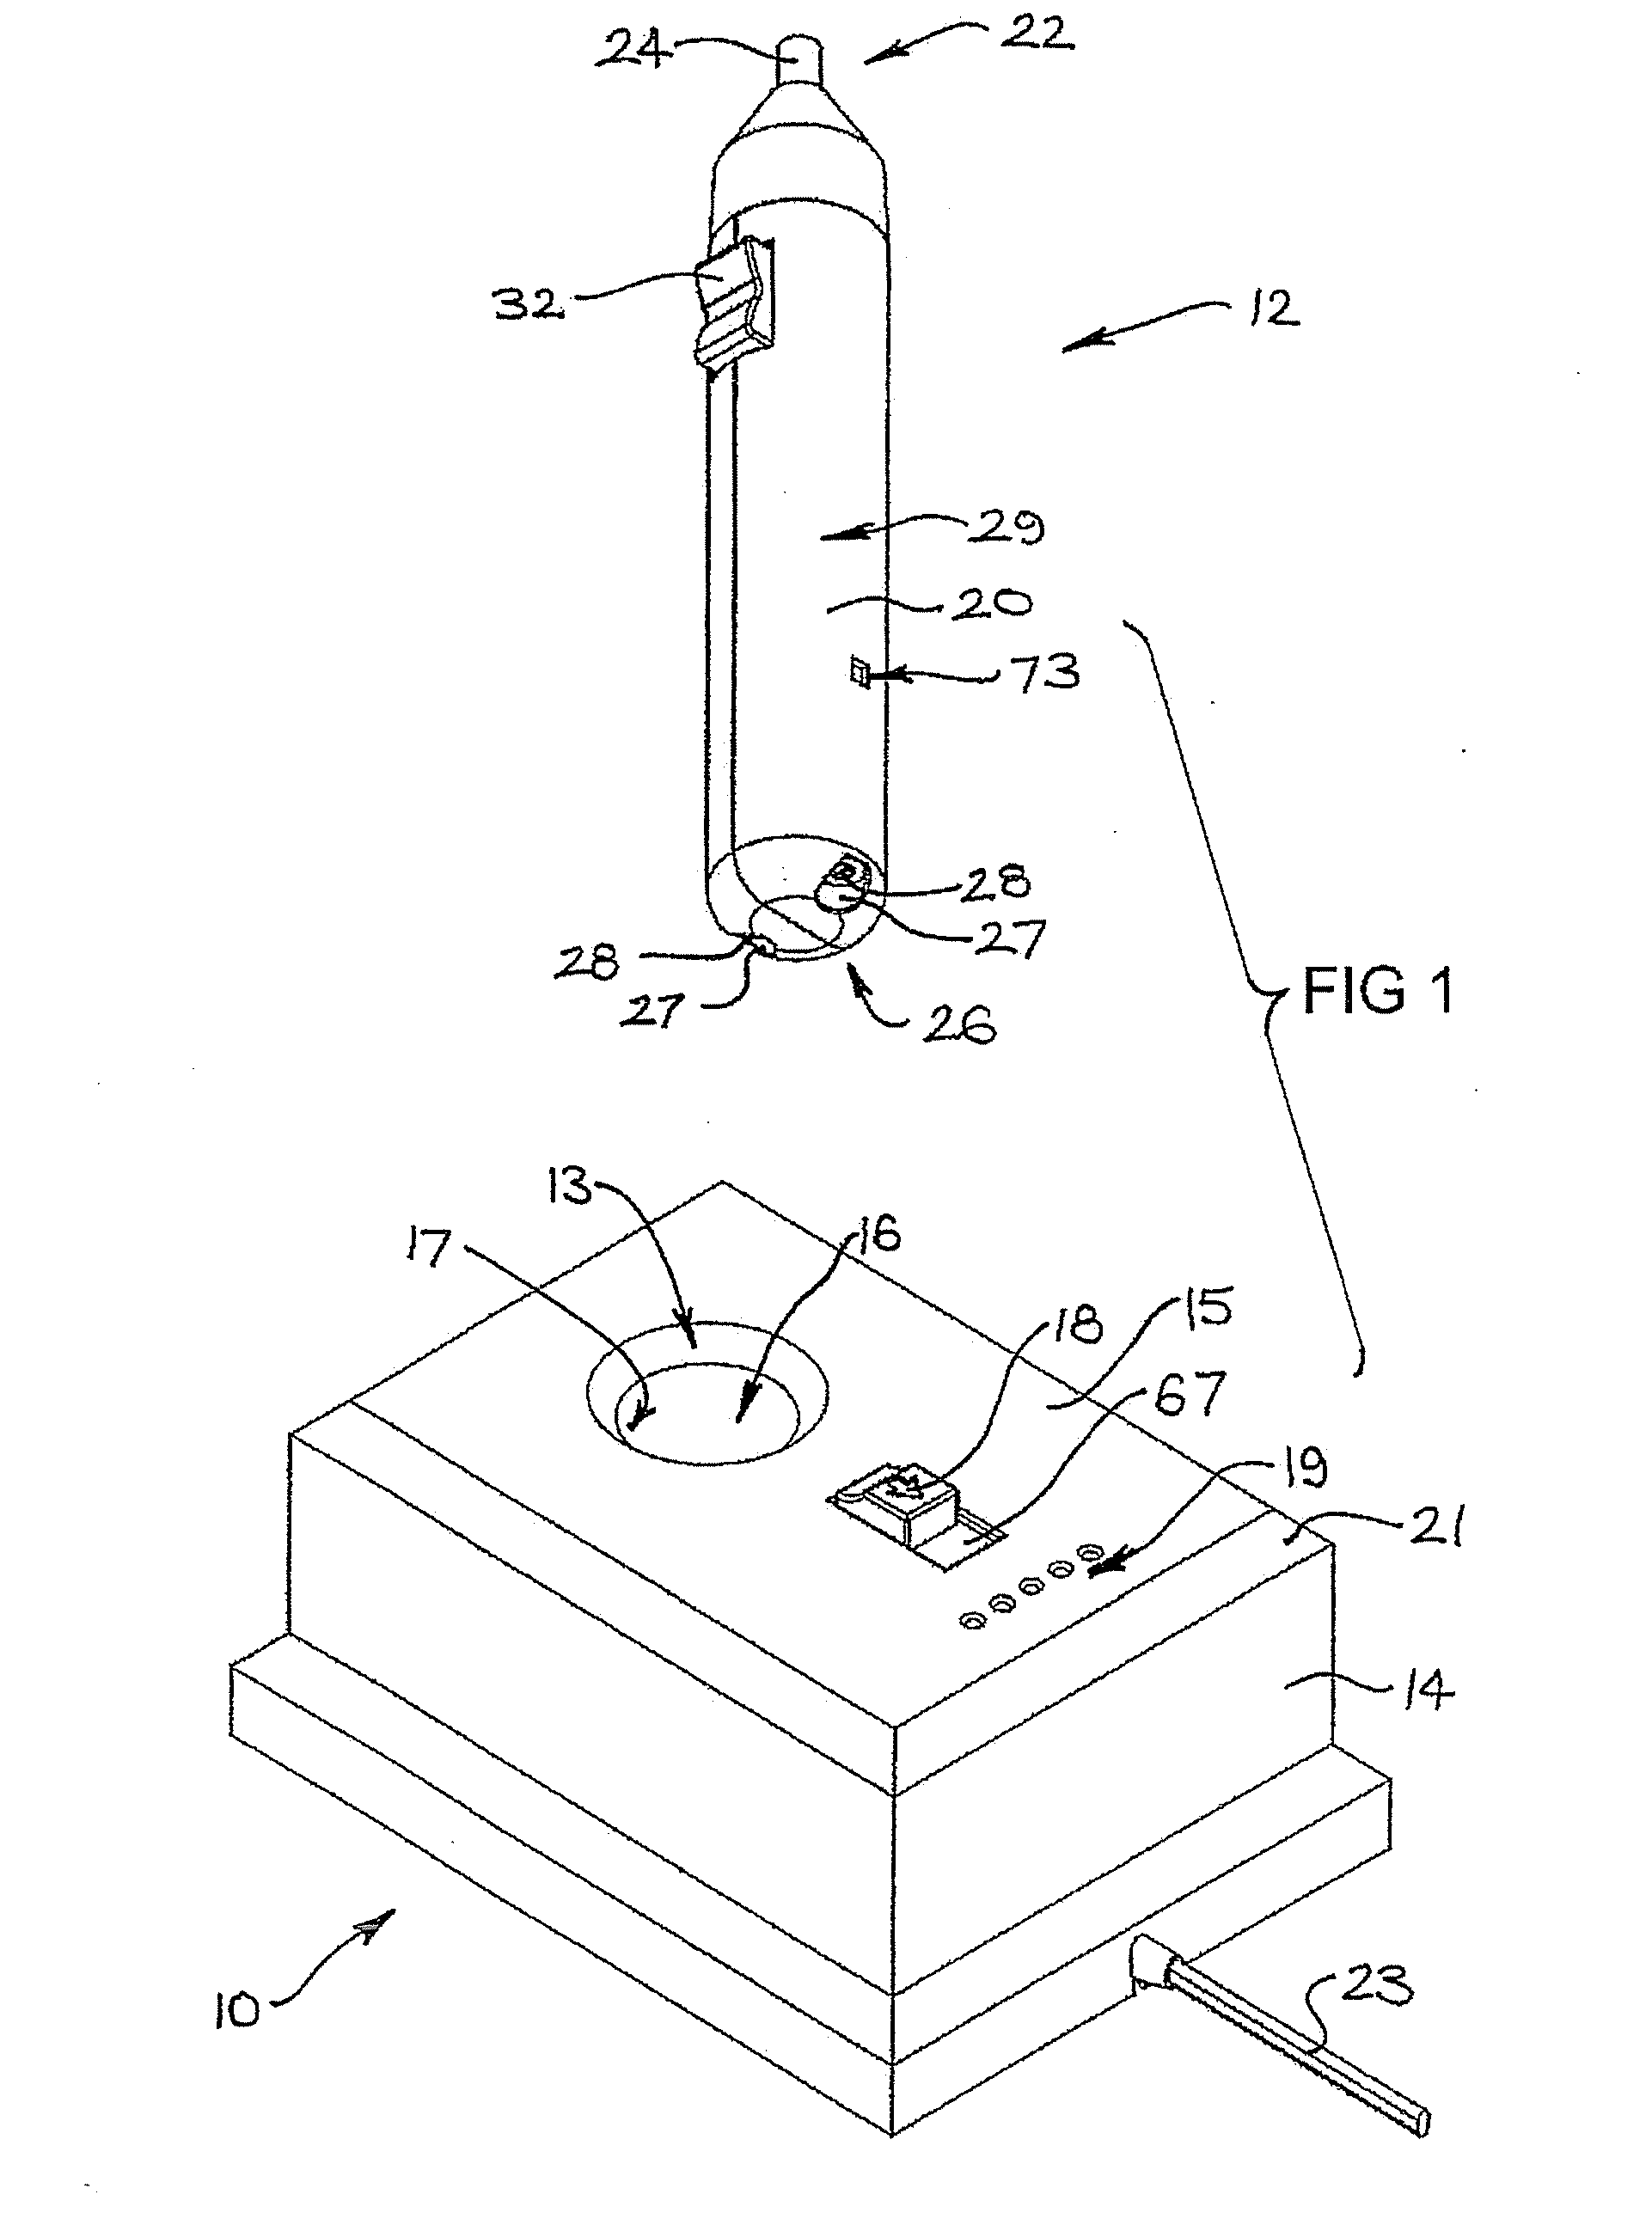 Electrical charger for charging rechargeable power tools